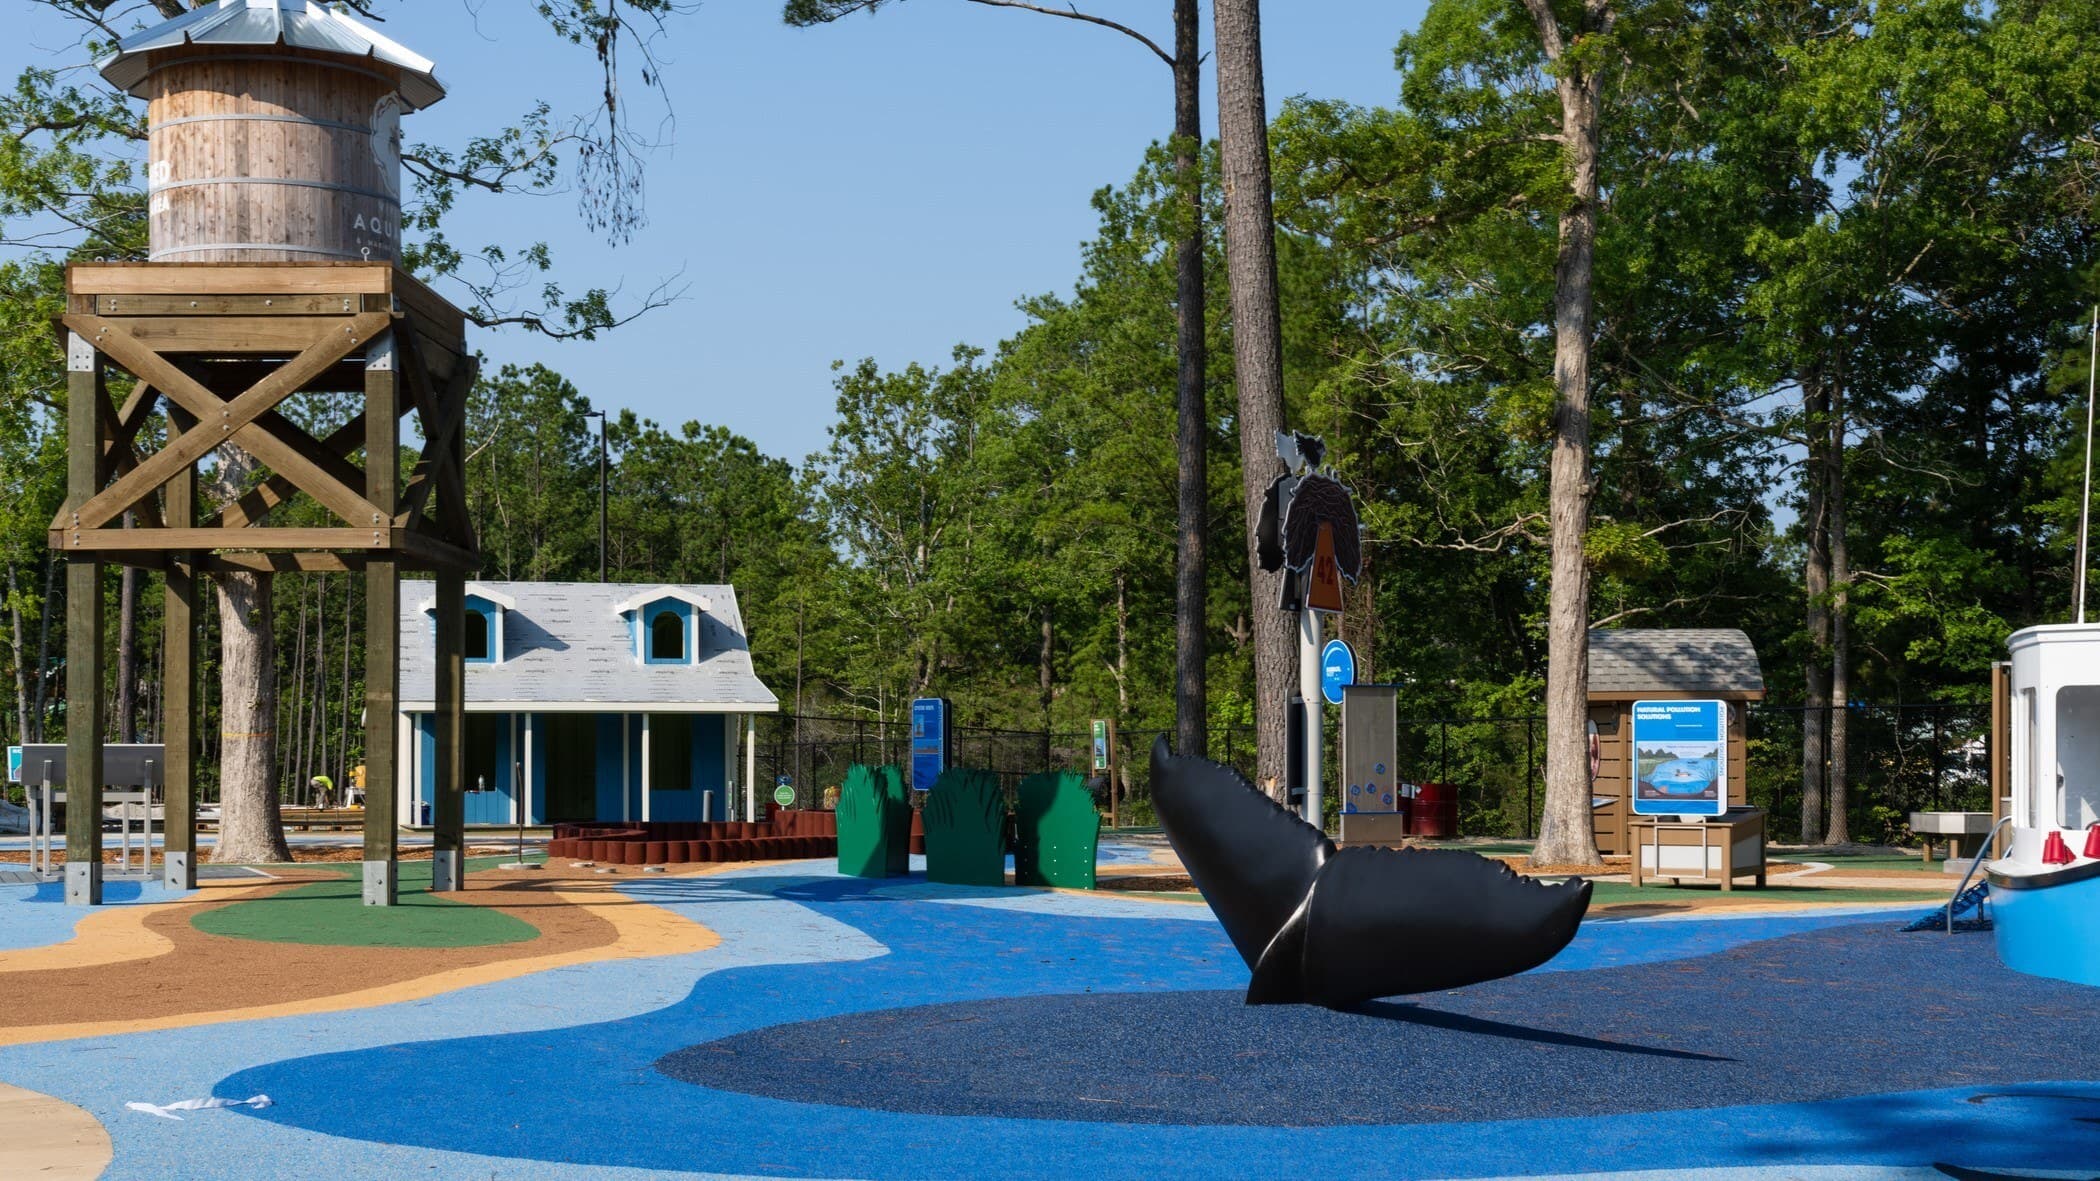 Our Watershed Play Area